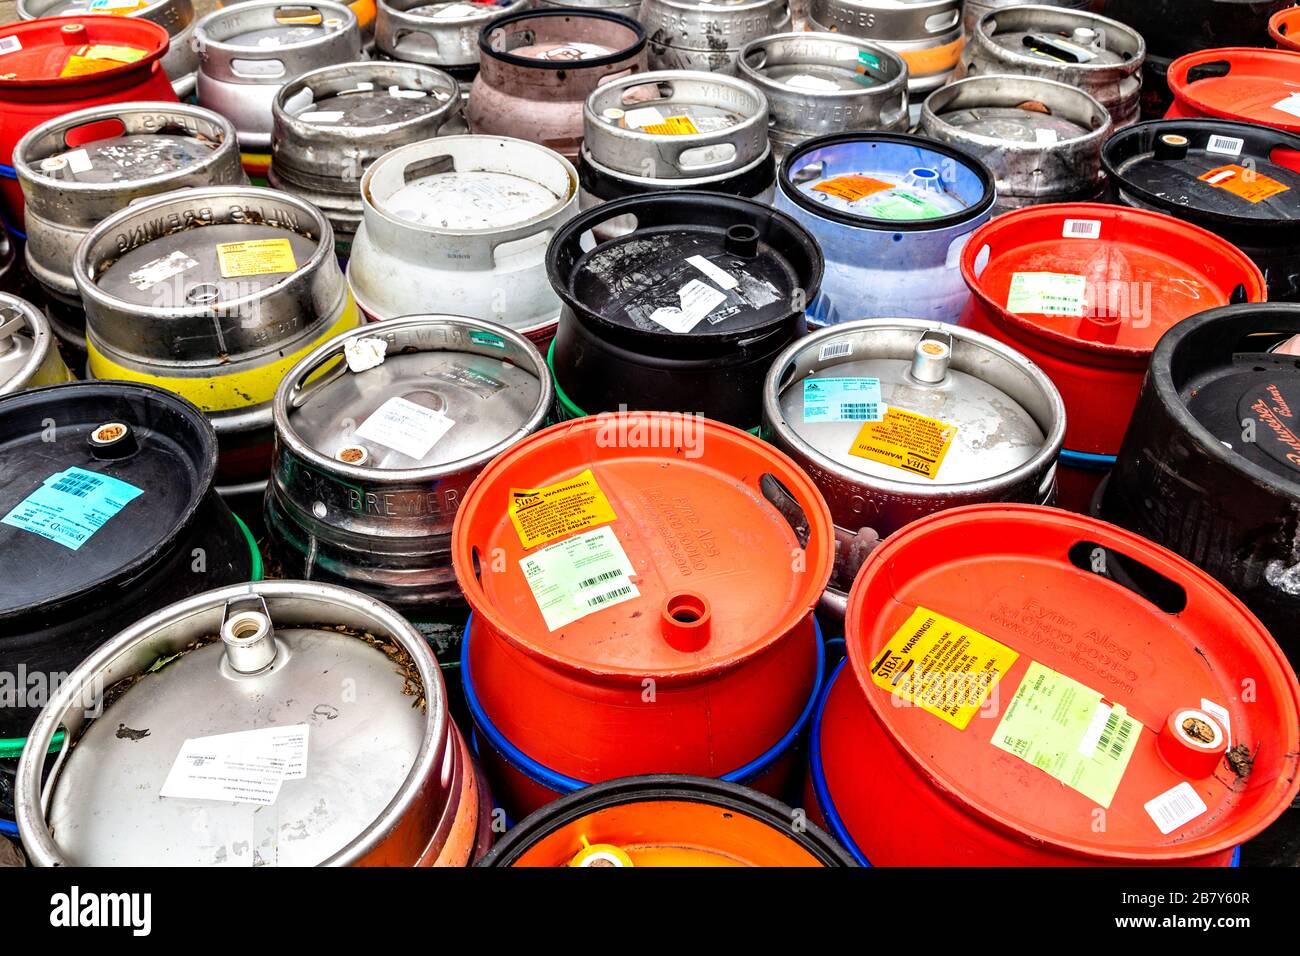 Beer kegs view from above Stock Photo